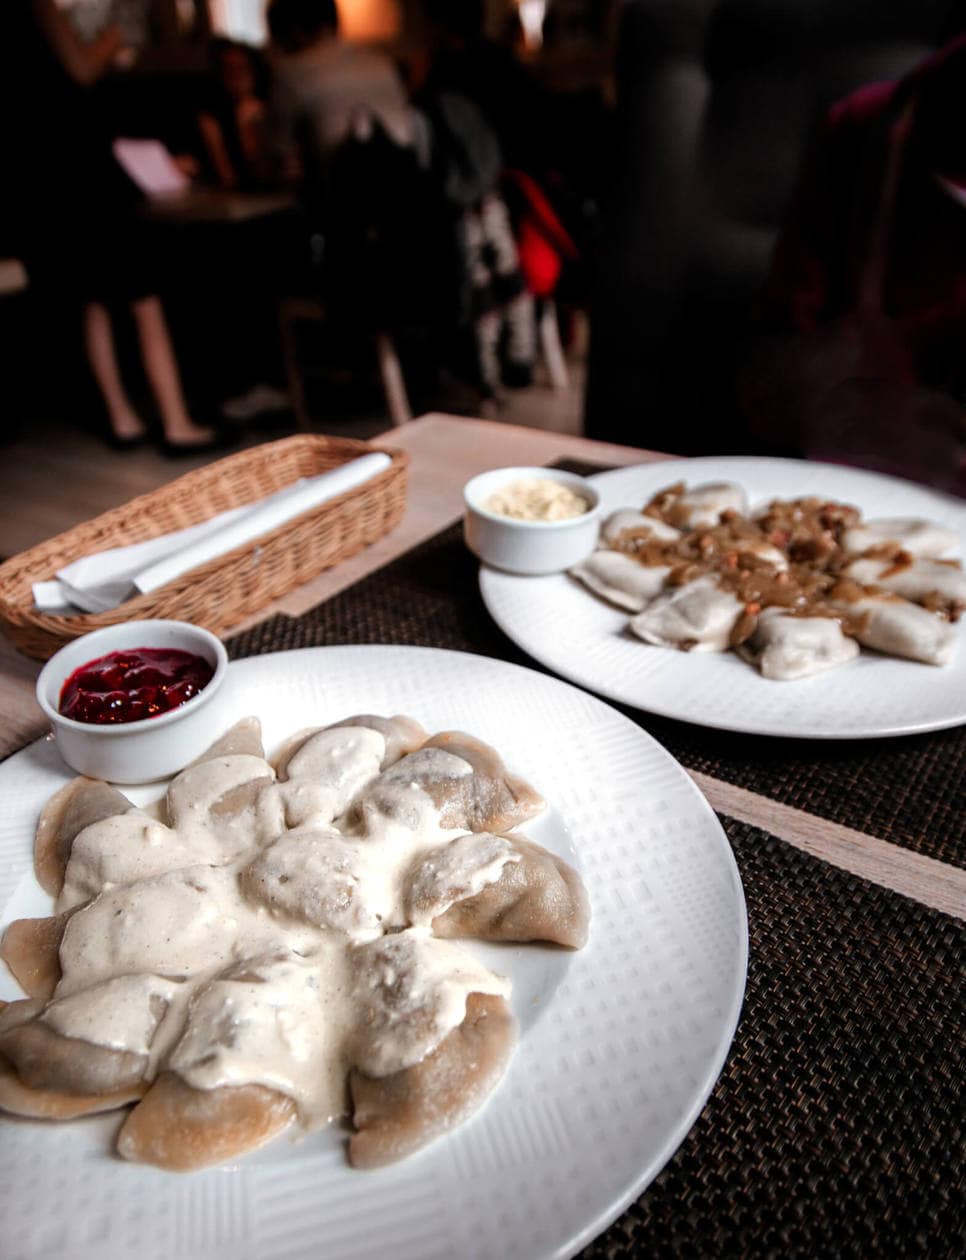  Pierogi is a traditional Polish food that's been around since the 13th century, and it's one of country's national dishes. These sweet & savory dumplings are a must try food in Poland, and Pierogarnia Mandu is known for having the best pierogi in Gdansk. Click now to read all about Polish pierogi and the most popular Pierogarnia in Gdansk.